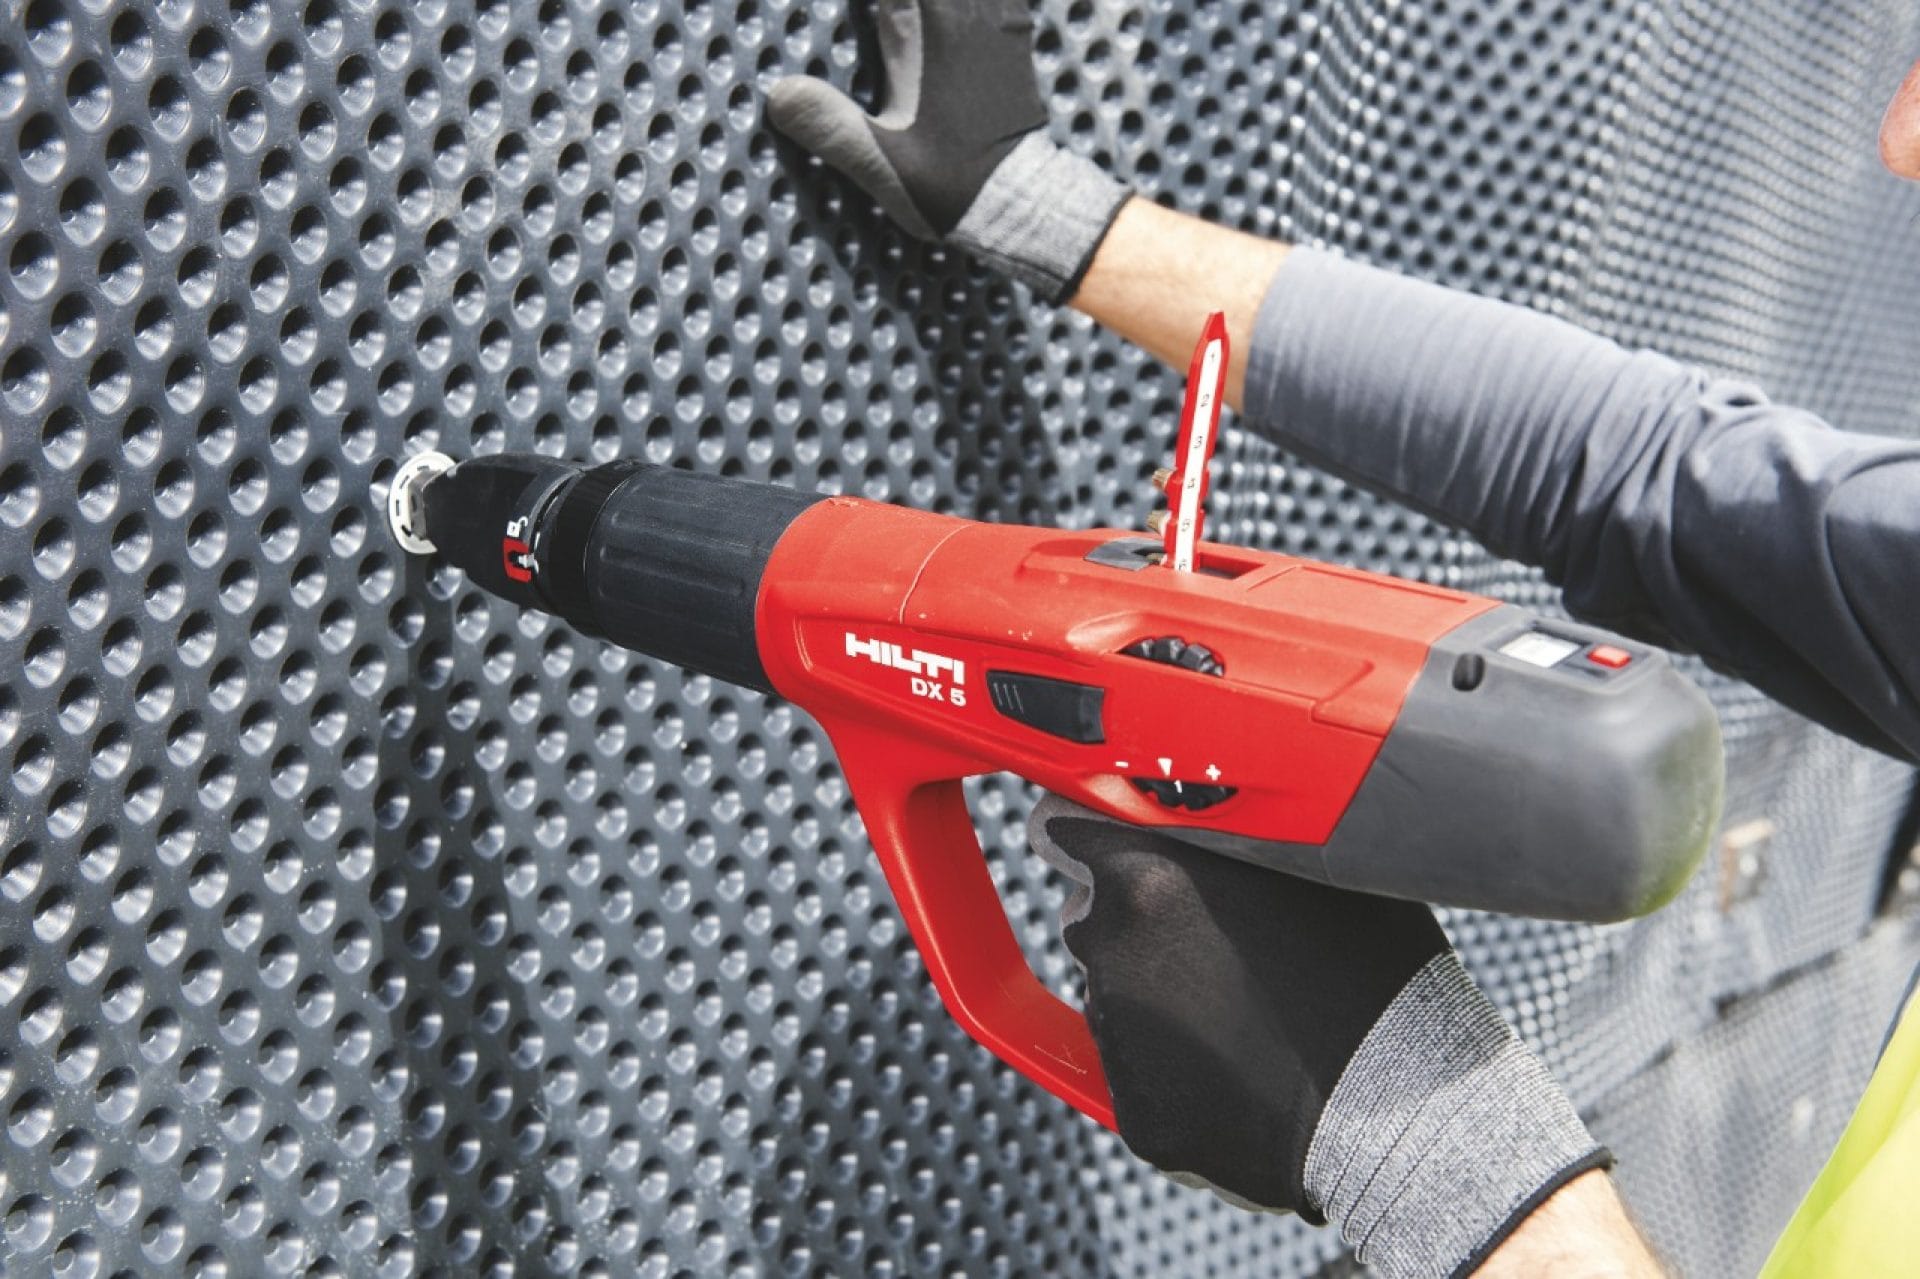 DX 5 powder-actuated tool fastening drainage membrane